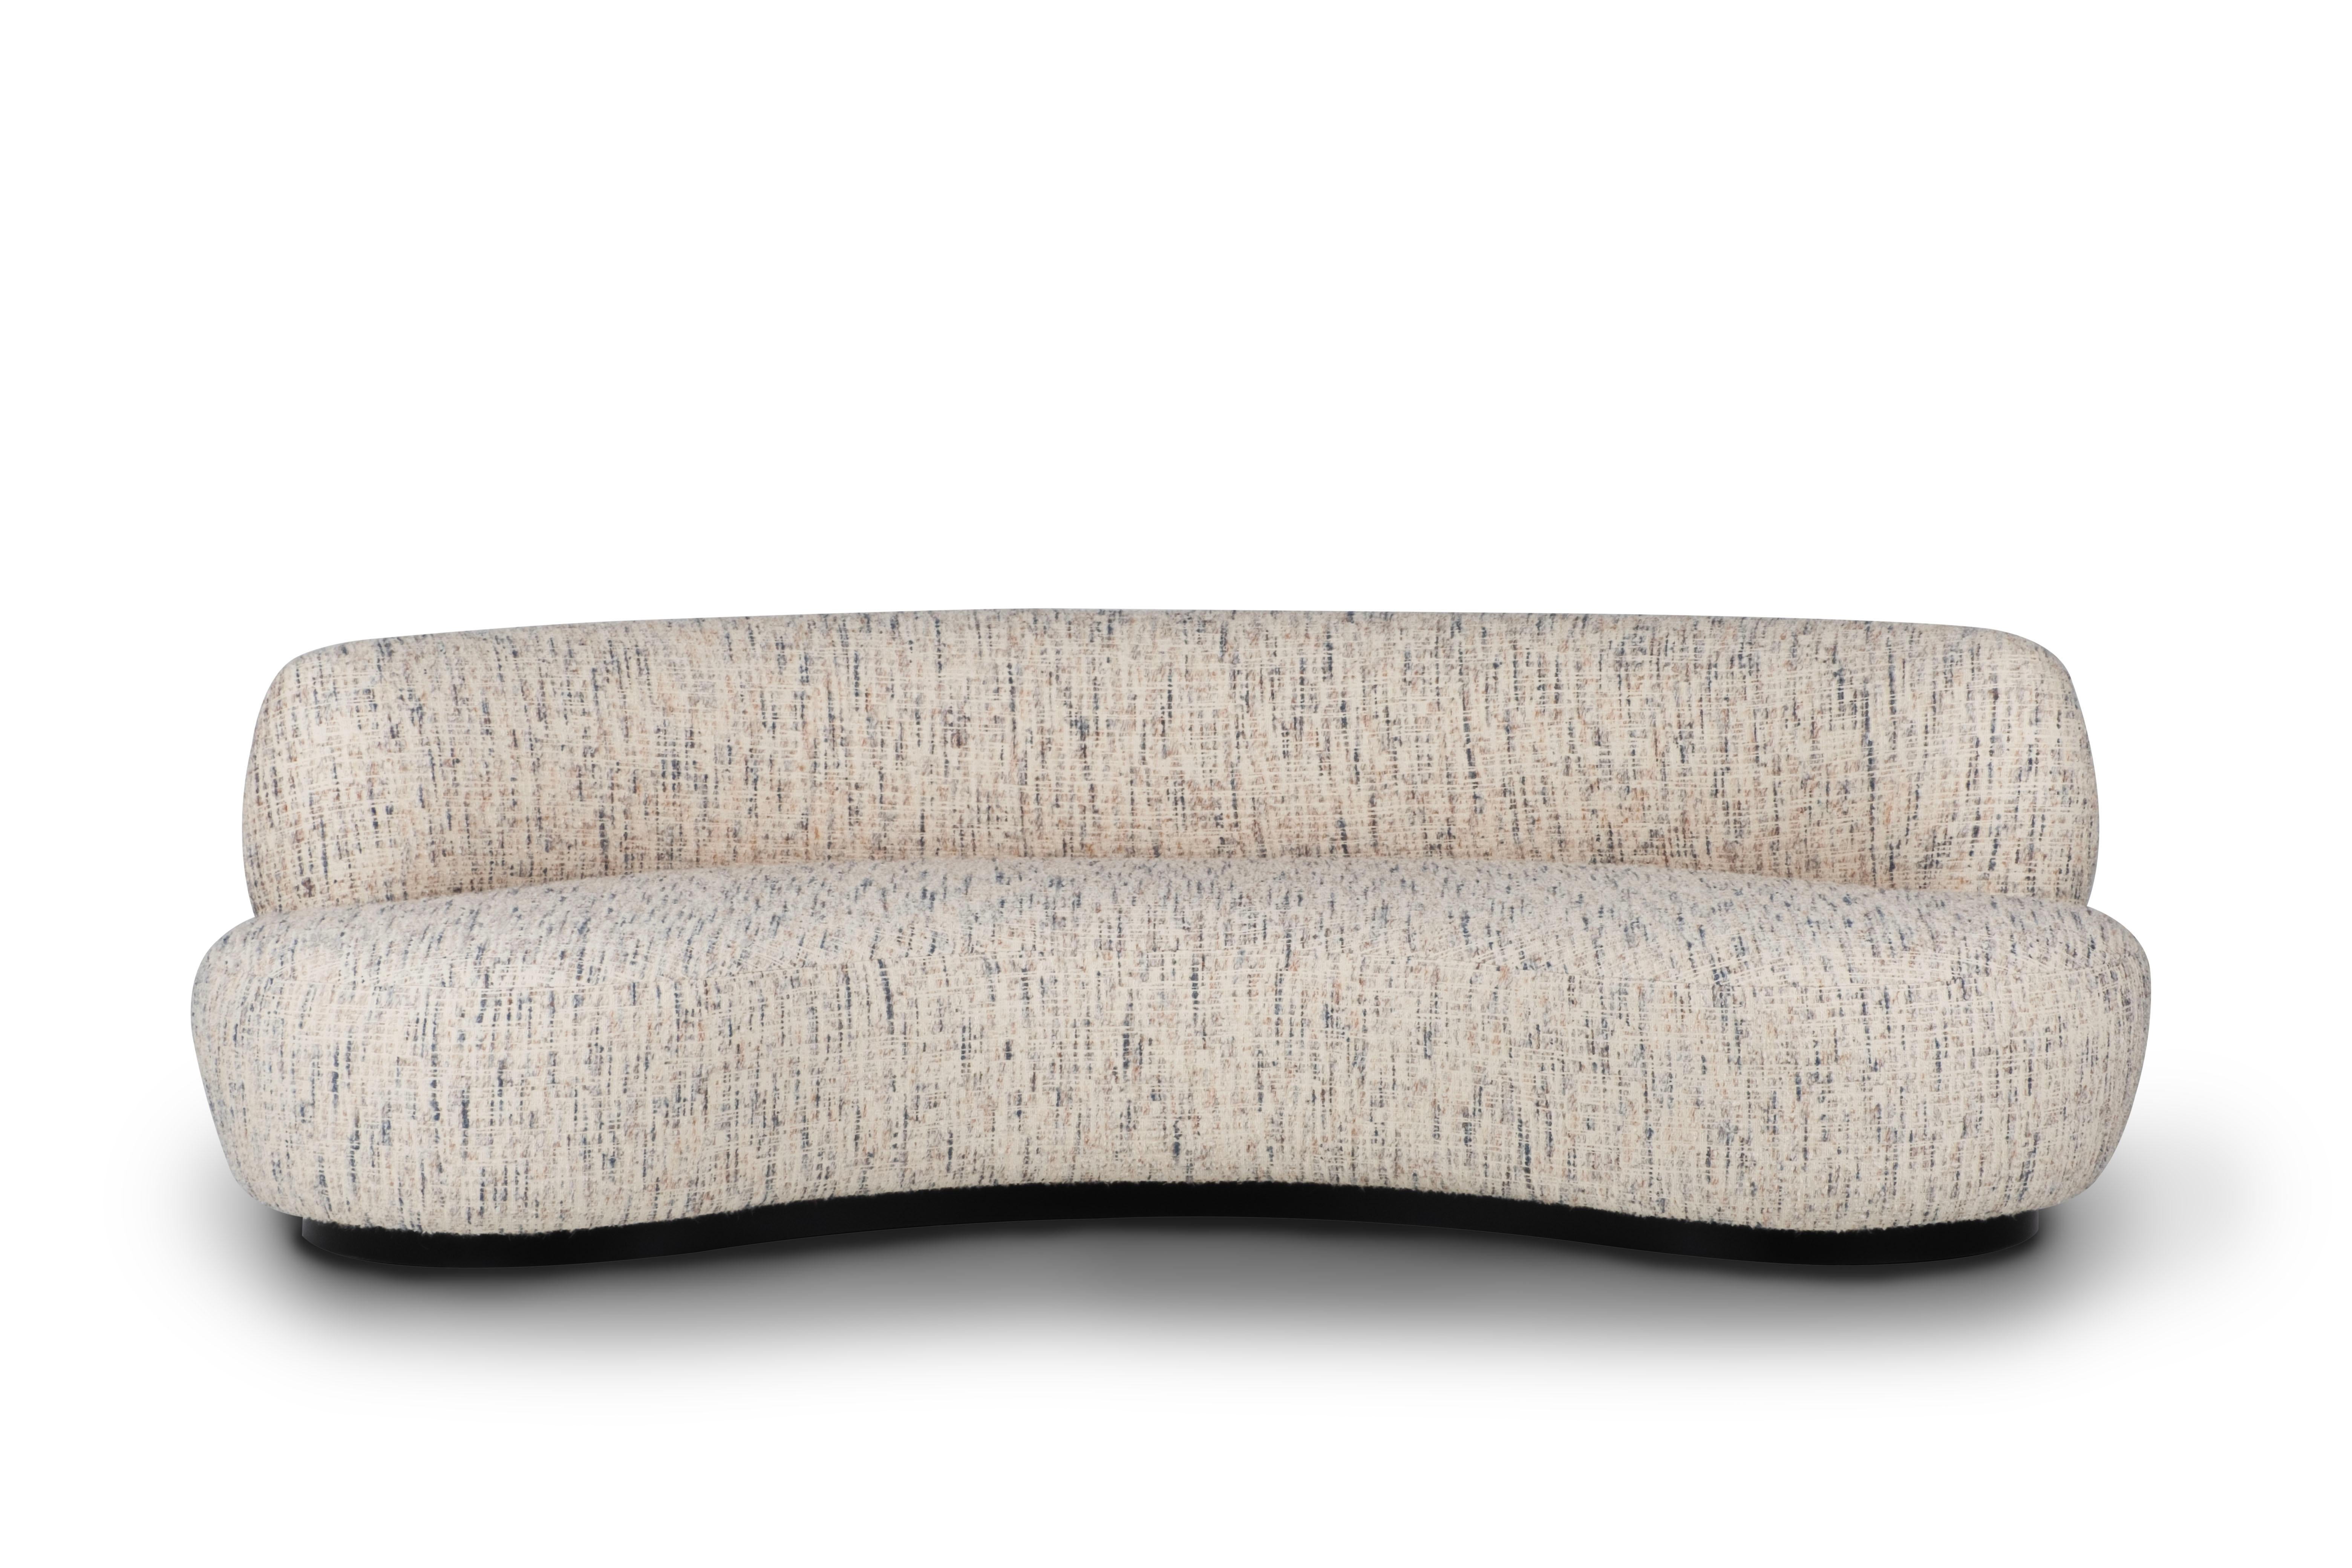 Lacquered Organic Modern Uffo Sofa NOBILIS Bouclé Handmade in Portugal by Greenapple For Sale